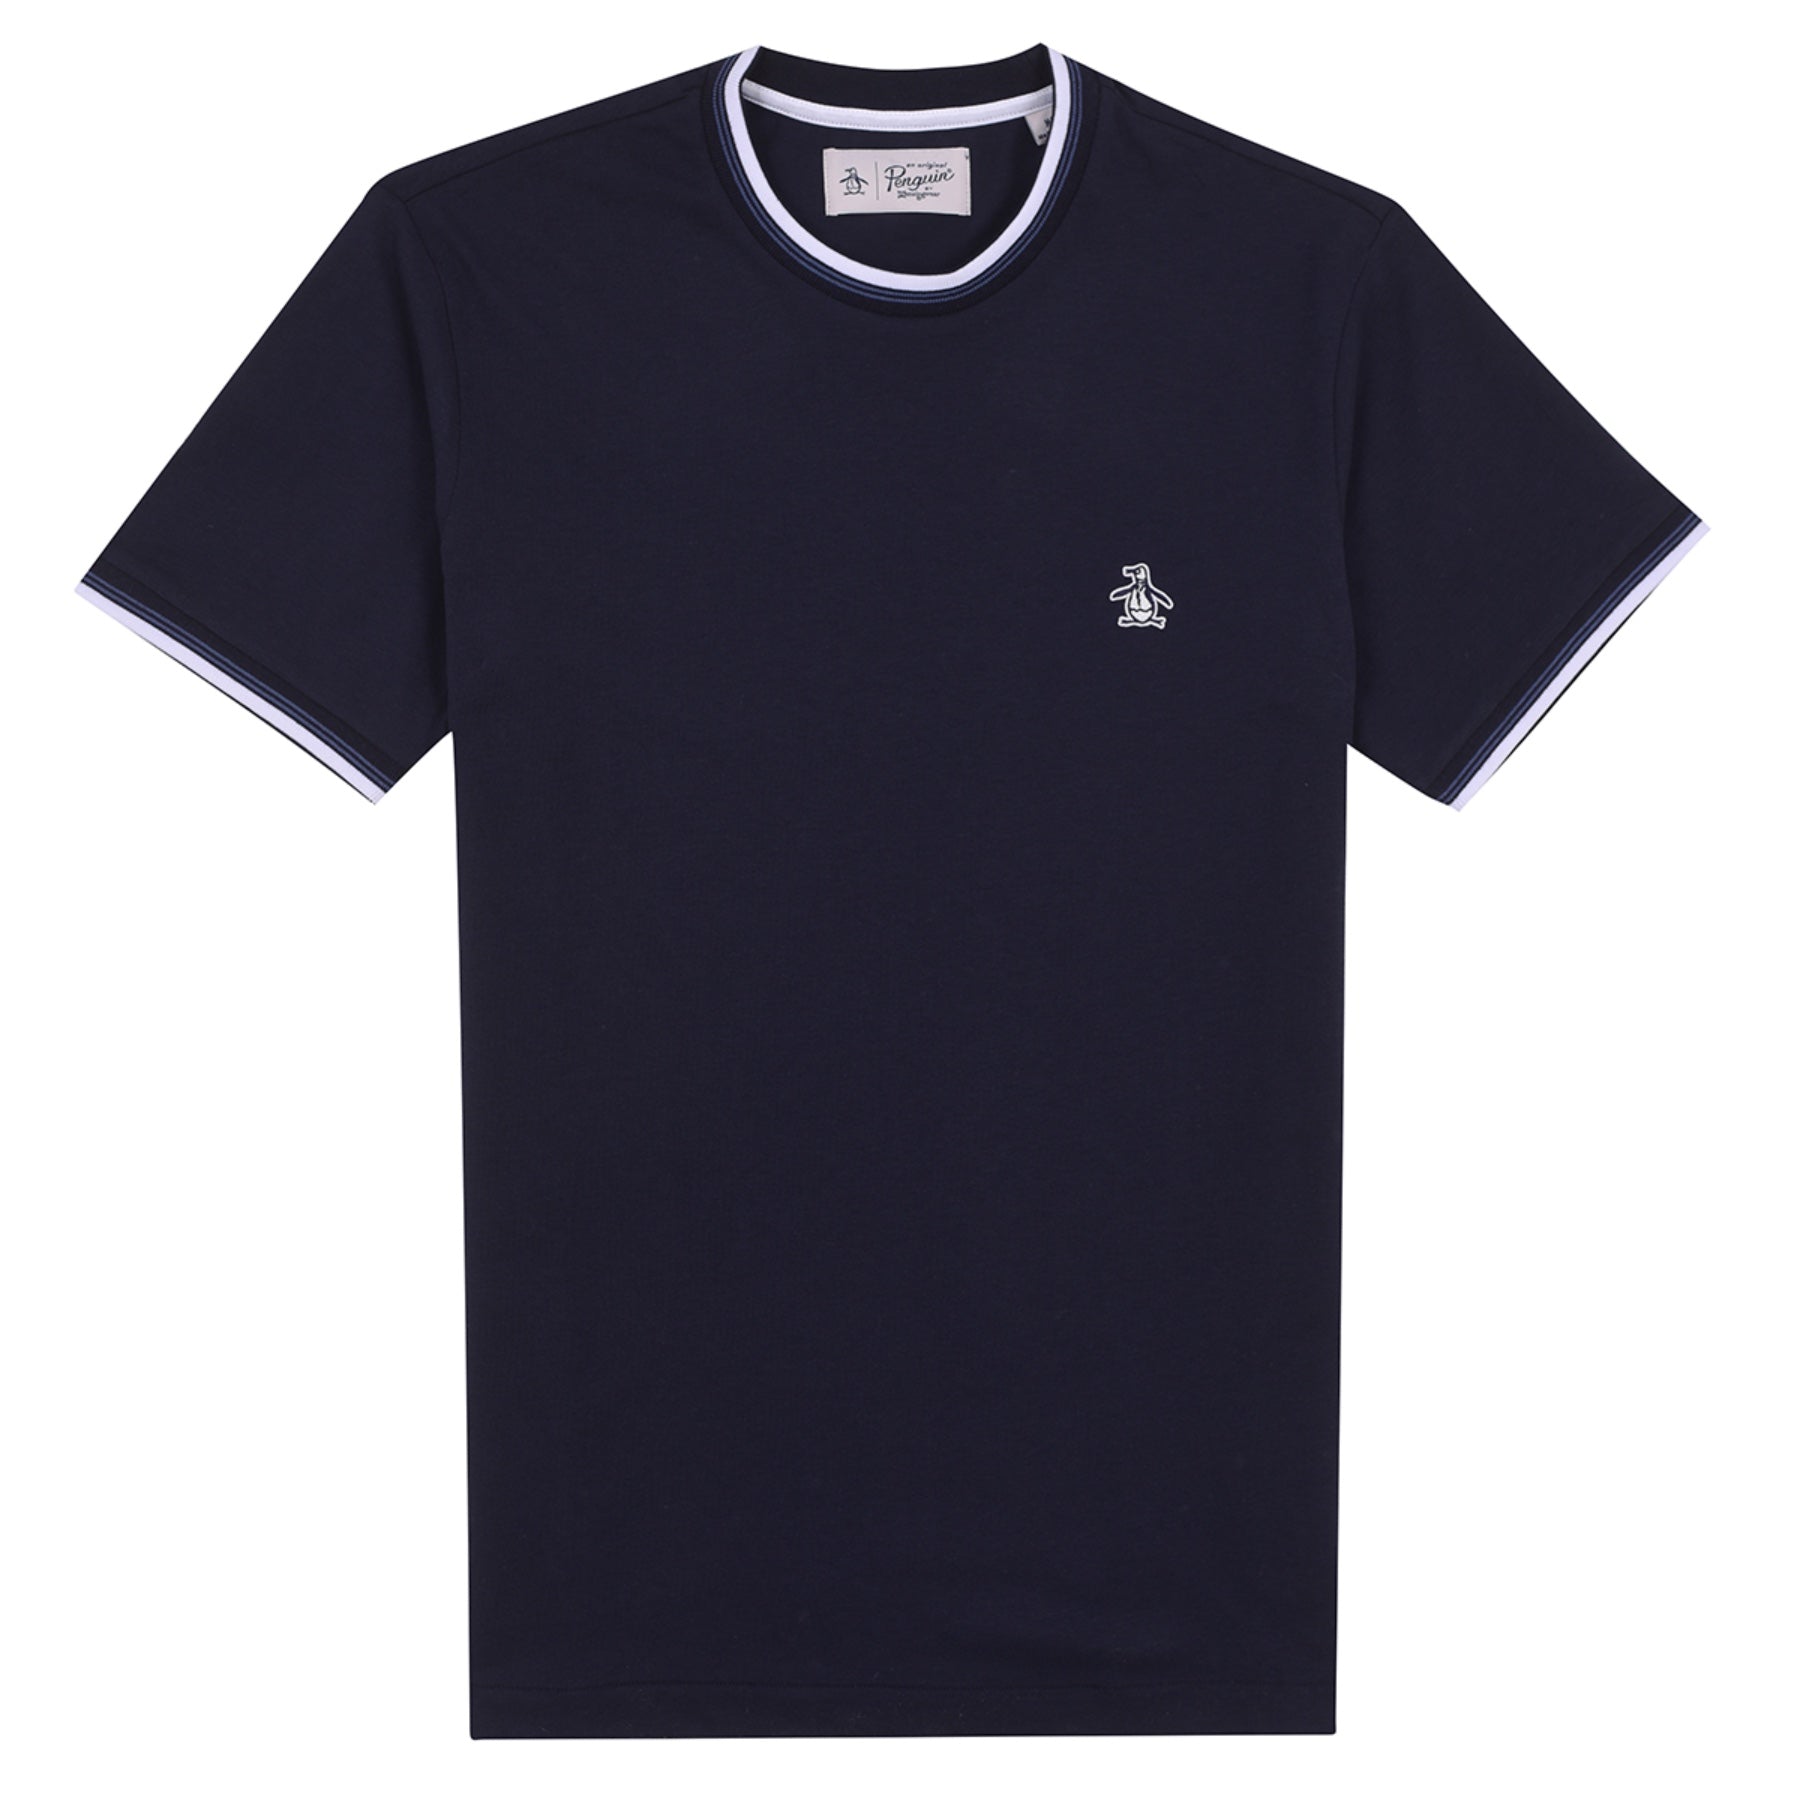 View Stcker Pete Tipped Ringer Organic Cotton TShirt In Dark Sapphire information